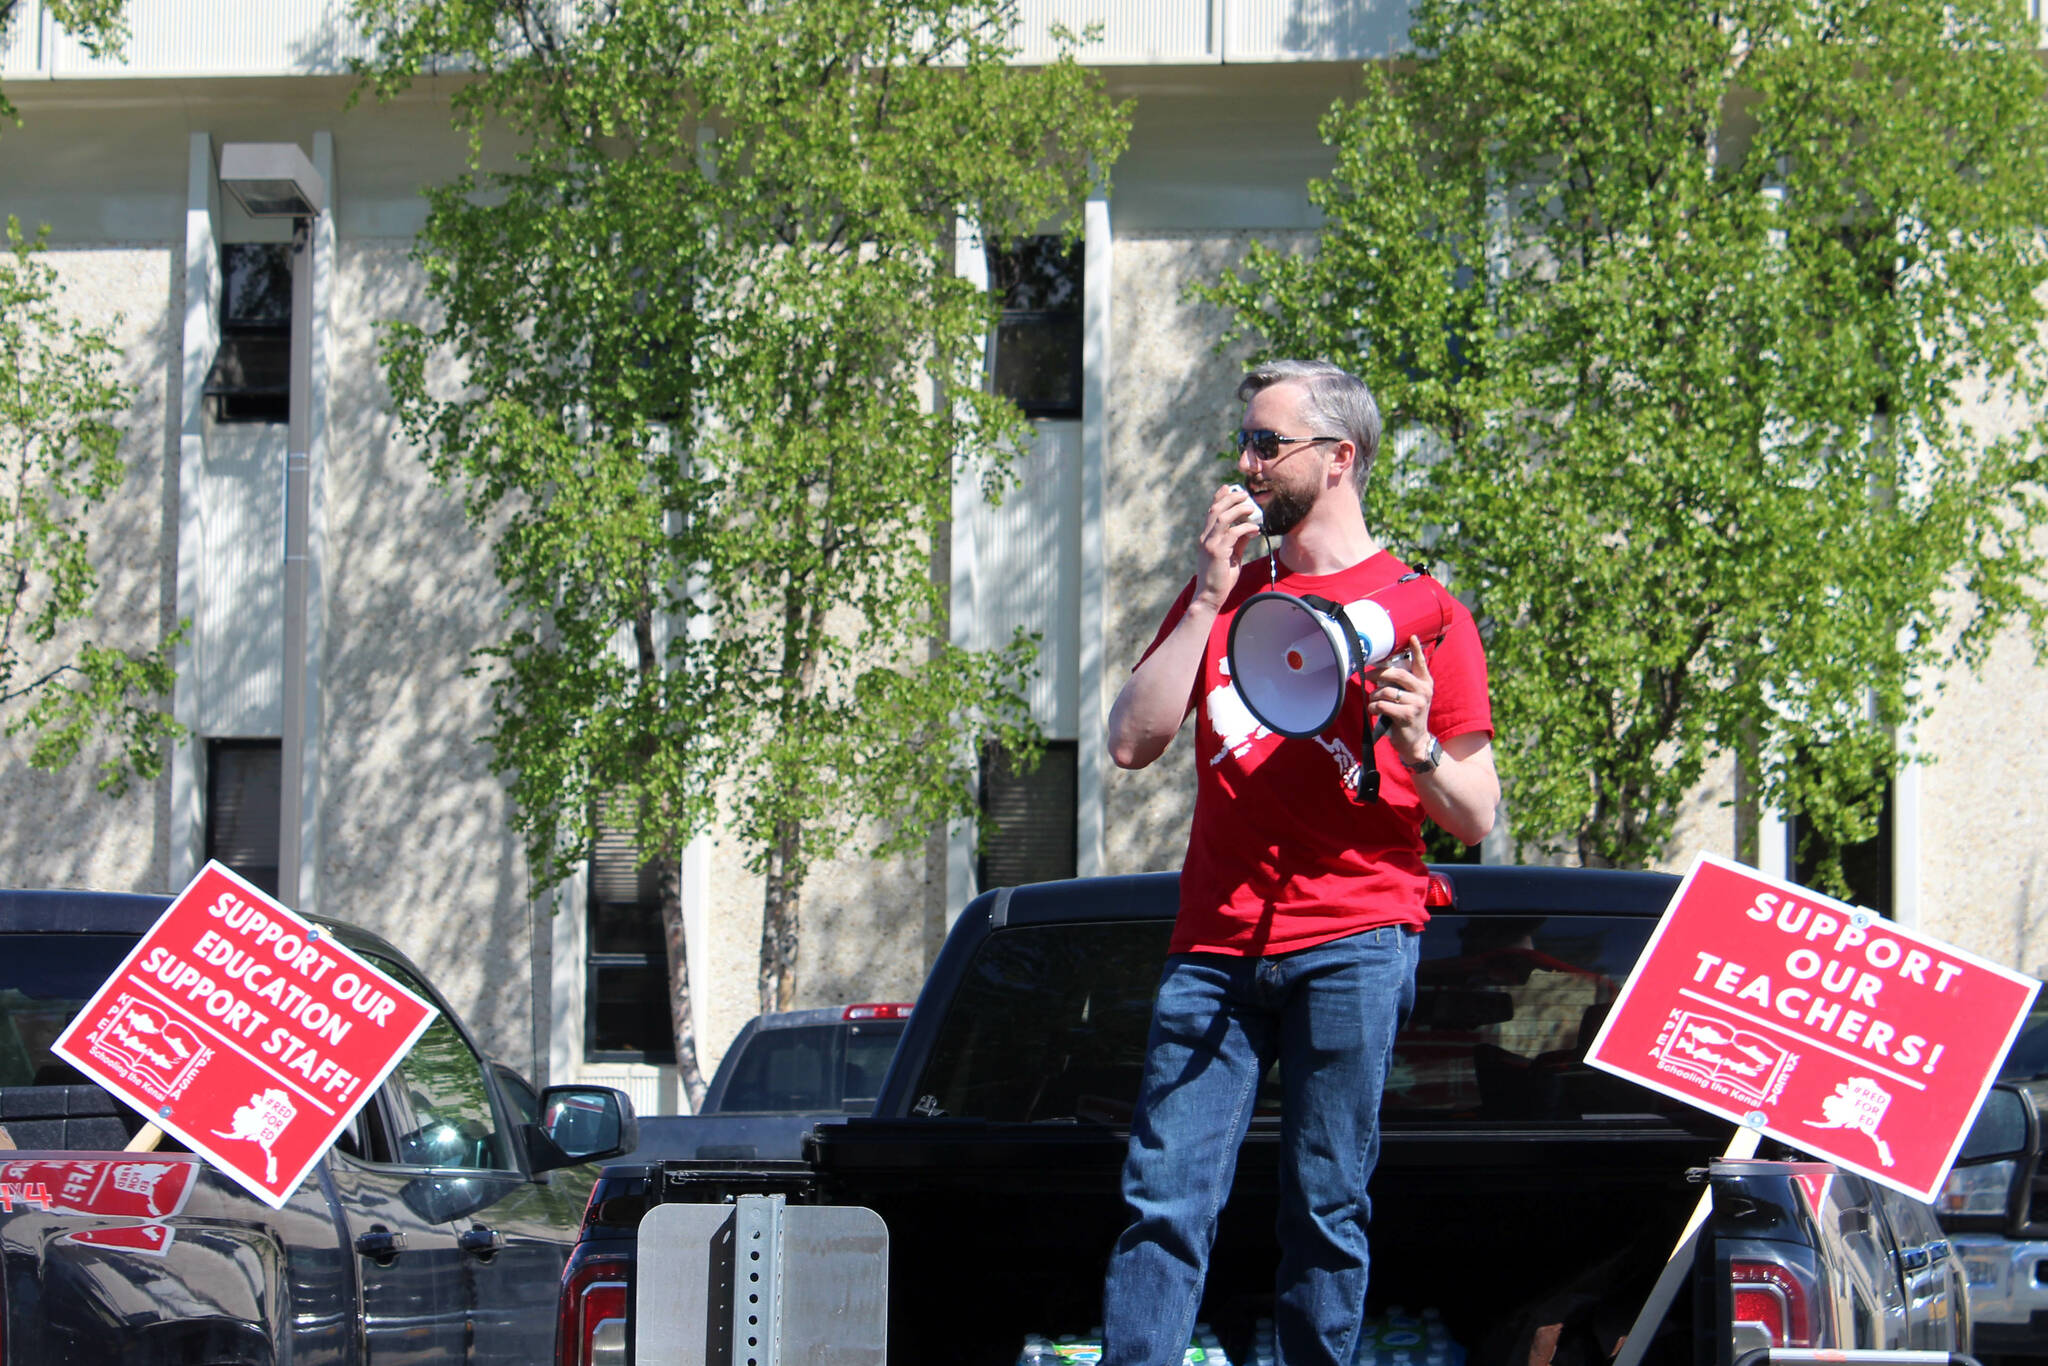 Kenai Peninsula Education Association President Nathan Erfurth speaks from the bed of his truck in support of Kenai Peninsula Borough School District teachers and support staff outside of the George A. Navarre Admin Building on Thursday, May 26, 2022 in Soldotna, Alaska. (Ashlyn O’Hara/Peninsula Clarion)